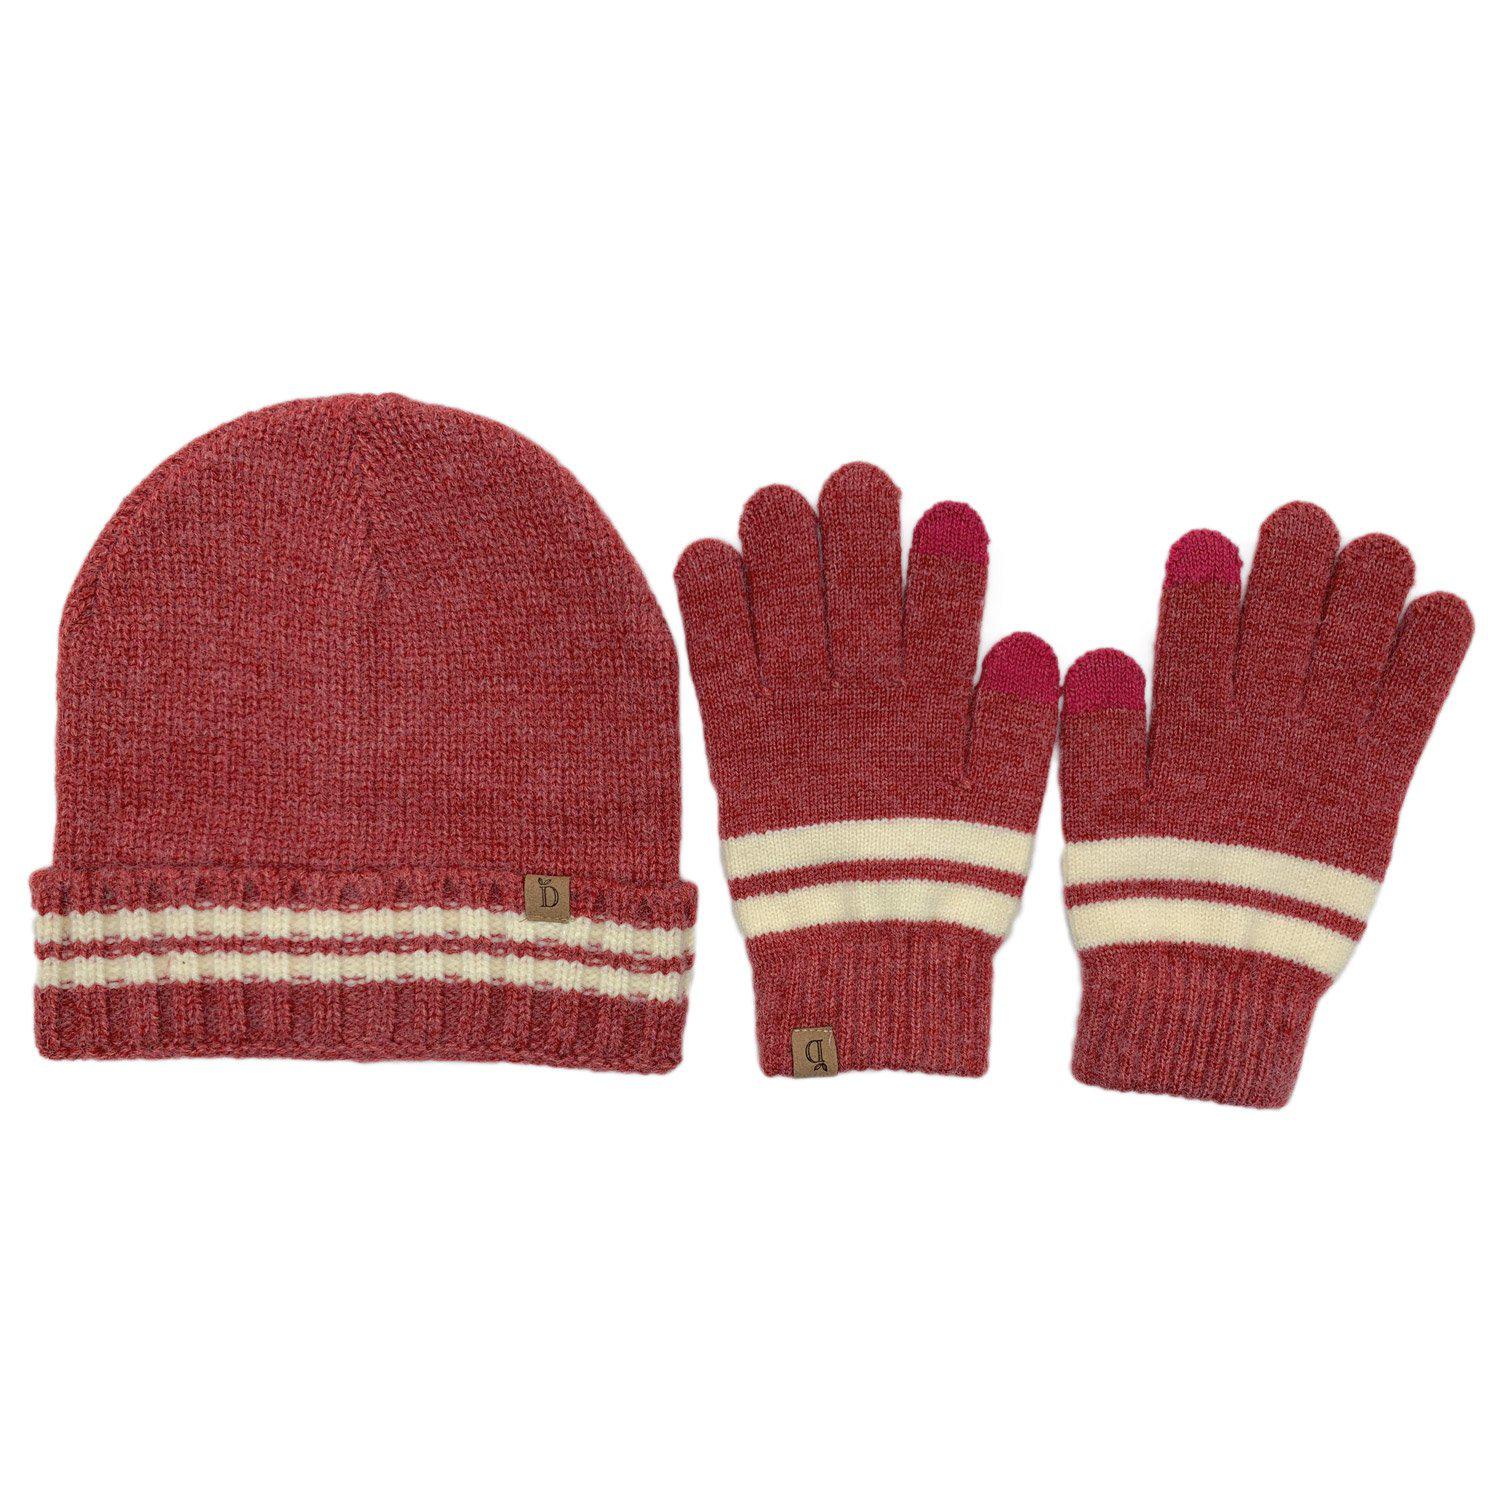 Empire Cove Winter Set Knit Striped Beanie and Touch Screen Gloves Gift Set-Hat/gloves-Empire Cove-Grey-Casaba Shop